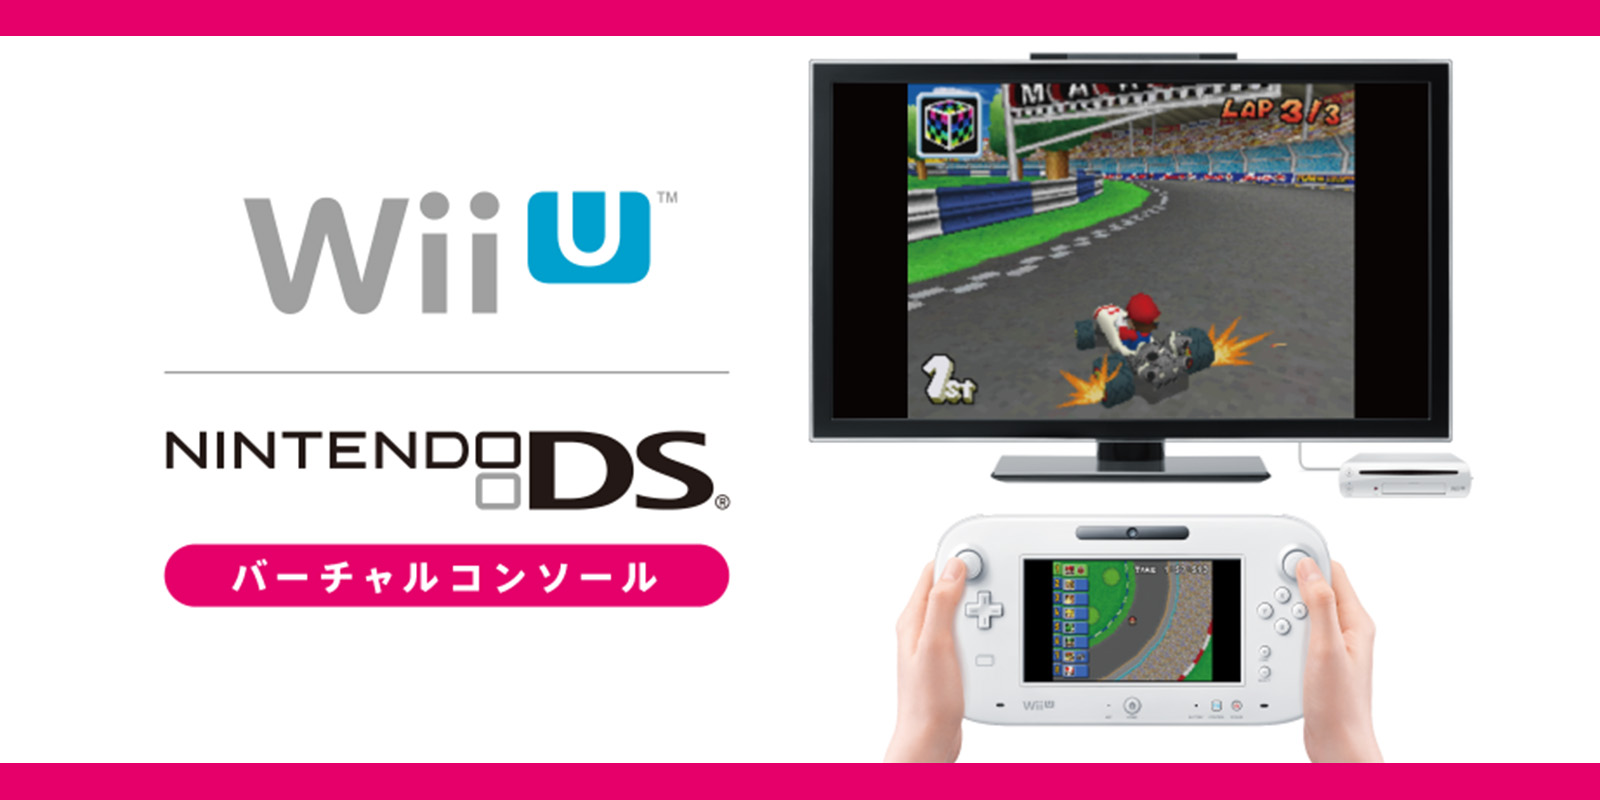 Nintendo releases first DS game for Wii U Virtual Console - The Verge